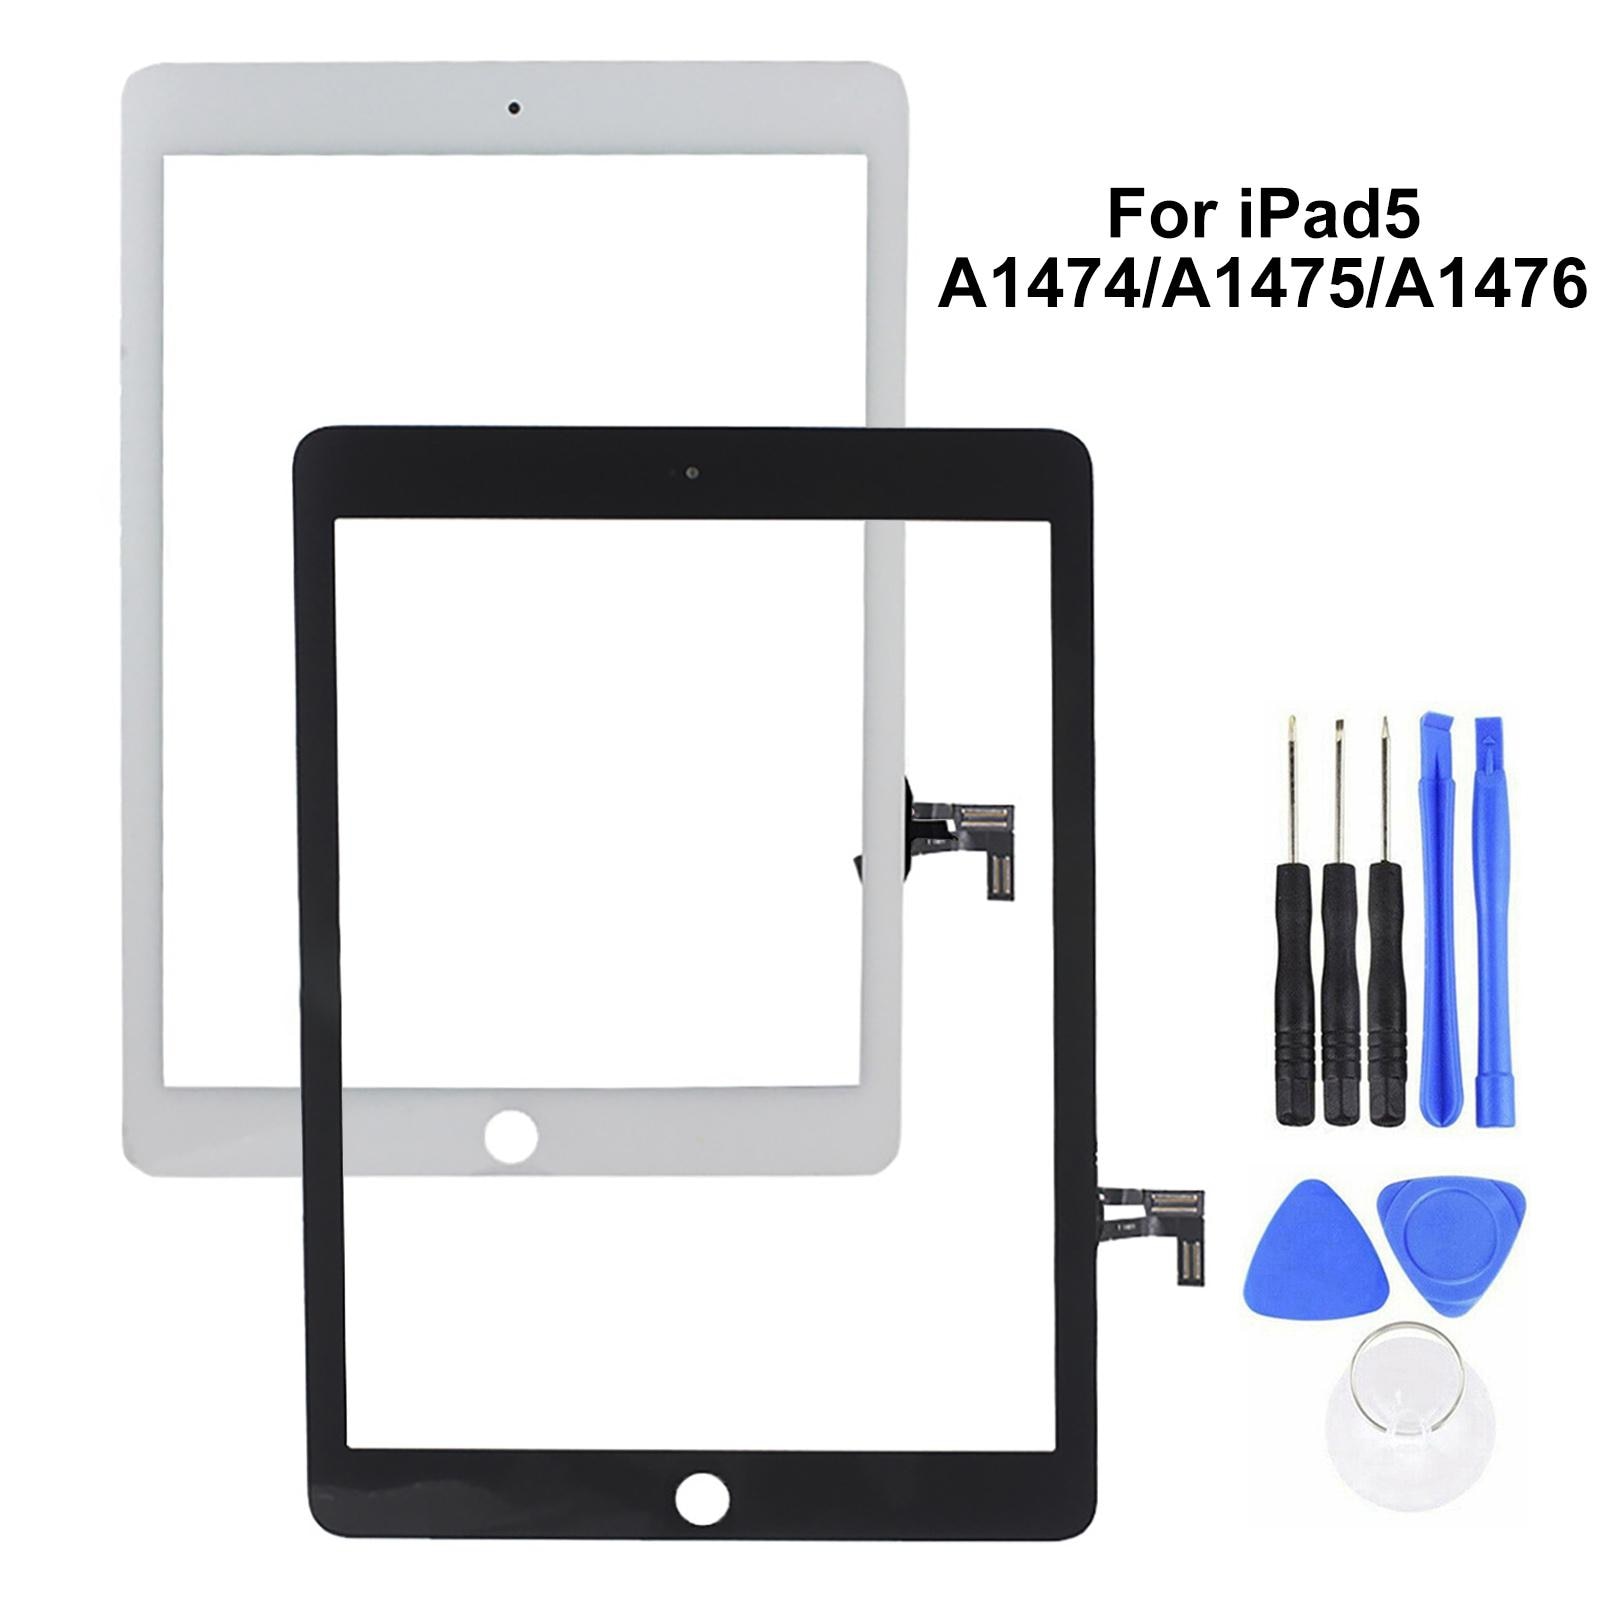 Voor Ipad Air 1 Ipad 5 Touch Screen Voor Touch Panel Display Vervanging A1474 A1475 A1476